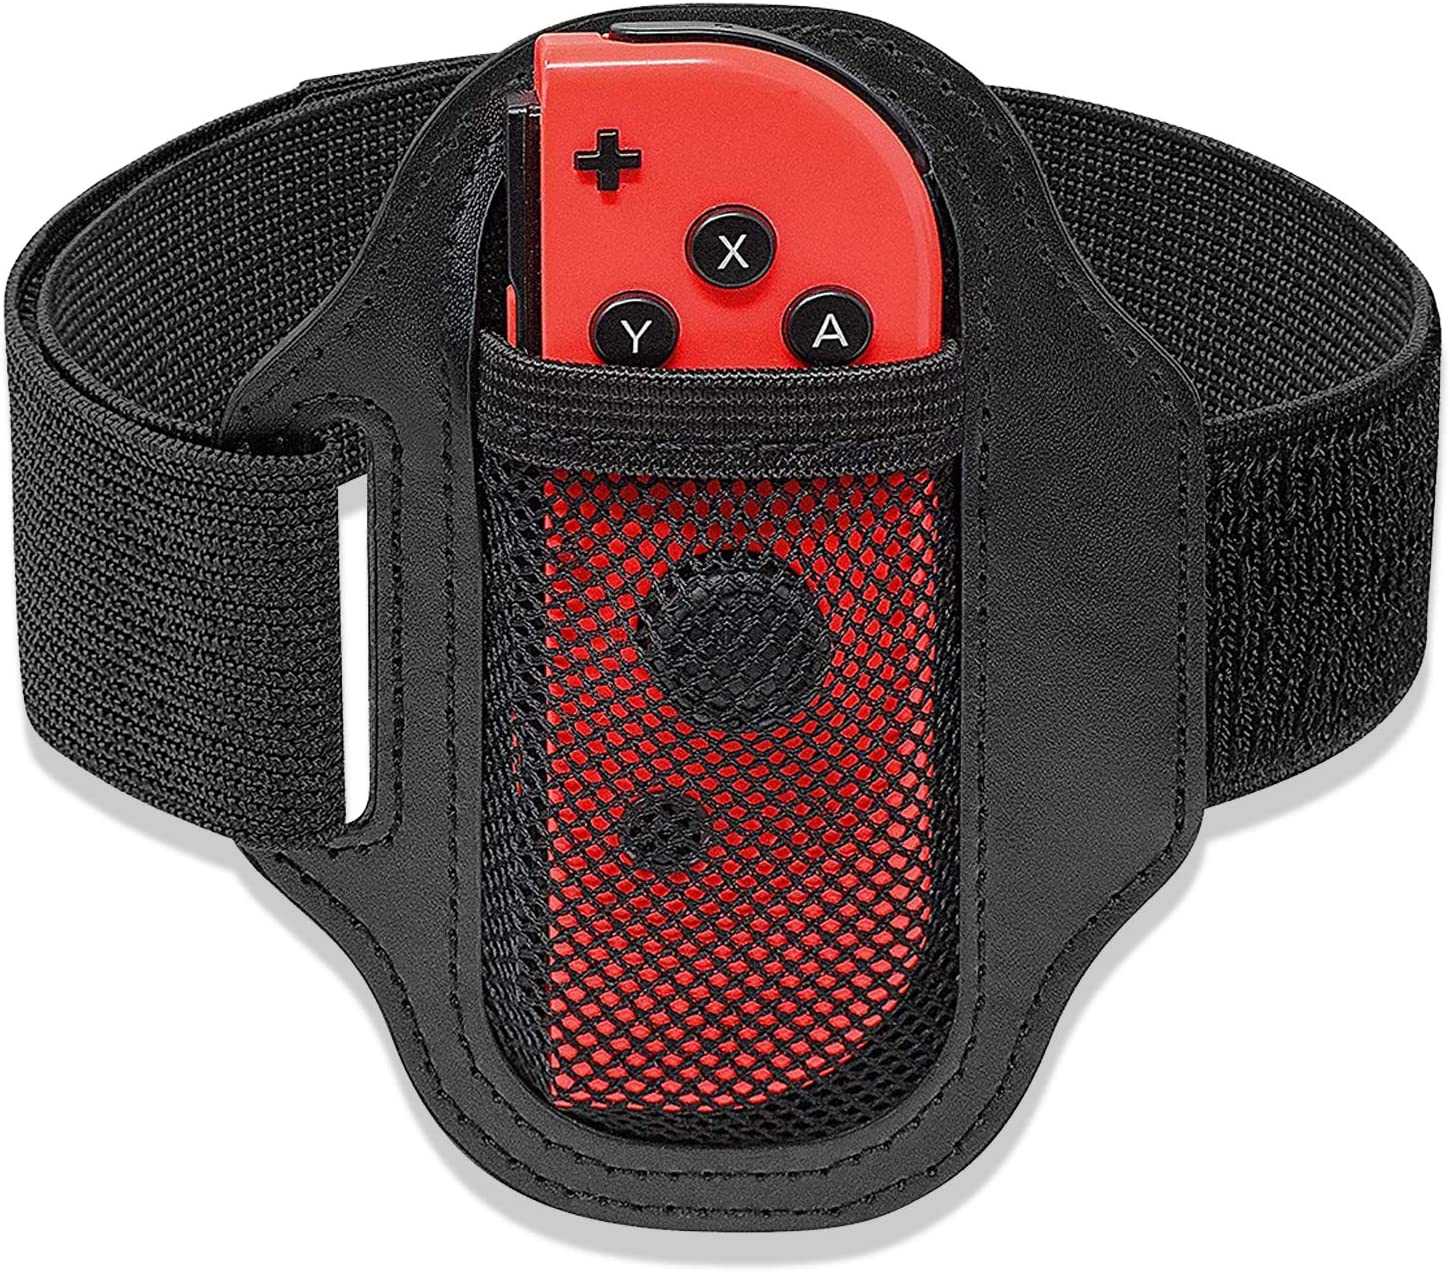 Nintendo Switch Sports Nintendo Switch Game Deals With Leg-strap